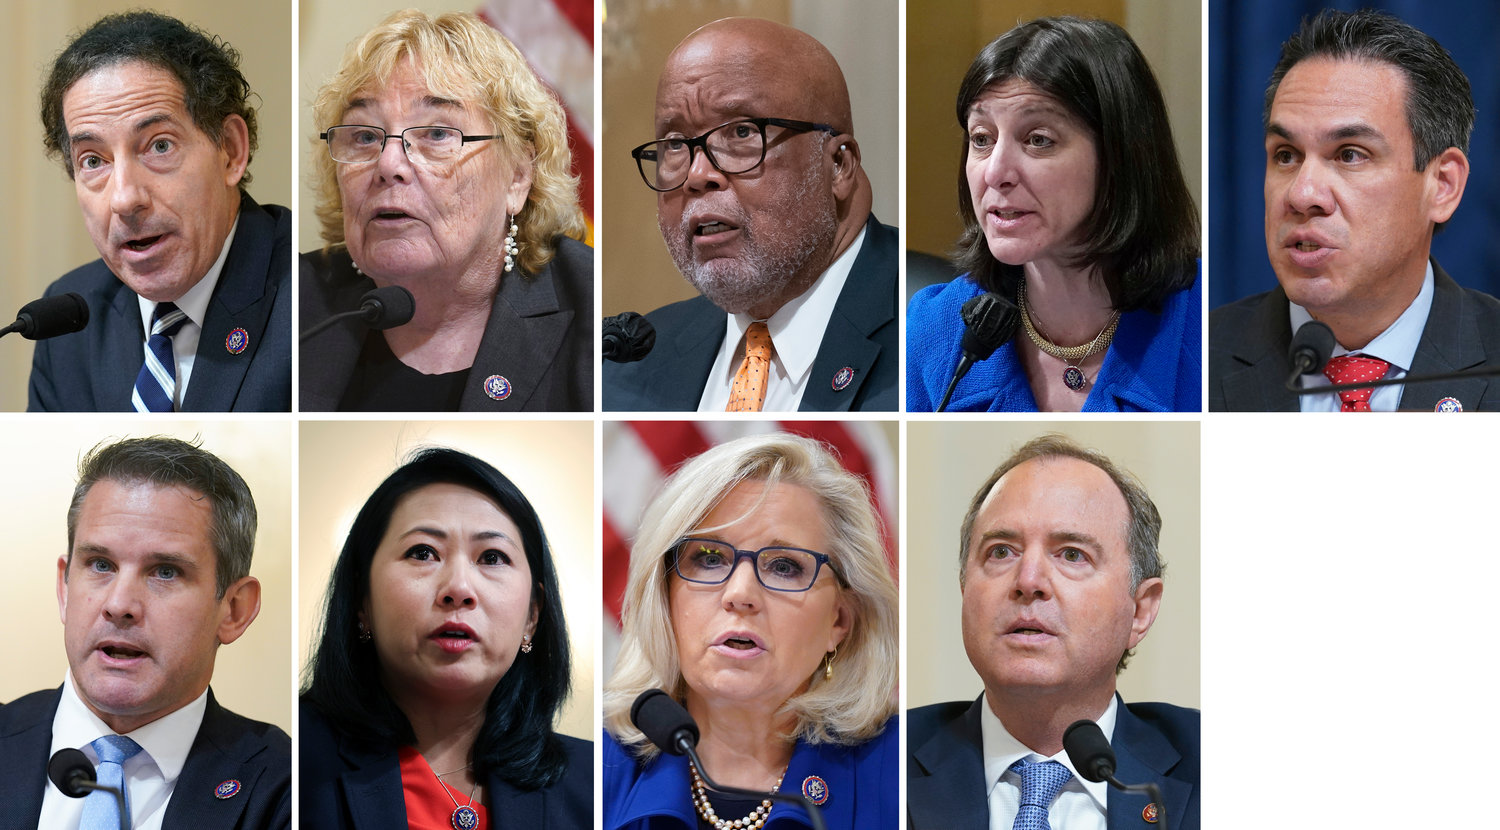 This combination of photos shows the members of the House select committee tasked with investigating the Jan. 6, attack. Top row from left, Rep. Jamie Raskin, D-Md., Rep. Zoe Lofgren, D-Calif., Chairman Rep. Bennie Thompson, D-Miss., Rep. Elaine Luria, D-Va., and Rep. Pete Aguilar, D-Calif. Bottom row from left, Rep. Adam Kinzinger, R-Ill., Rep. Stephanie Murphy, D-Fla., Rep. Liz Cheney, R-Wyo., and Rep. Adam Schiff, D-Calif. (AP Photo)